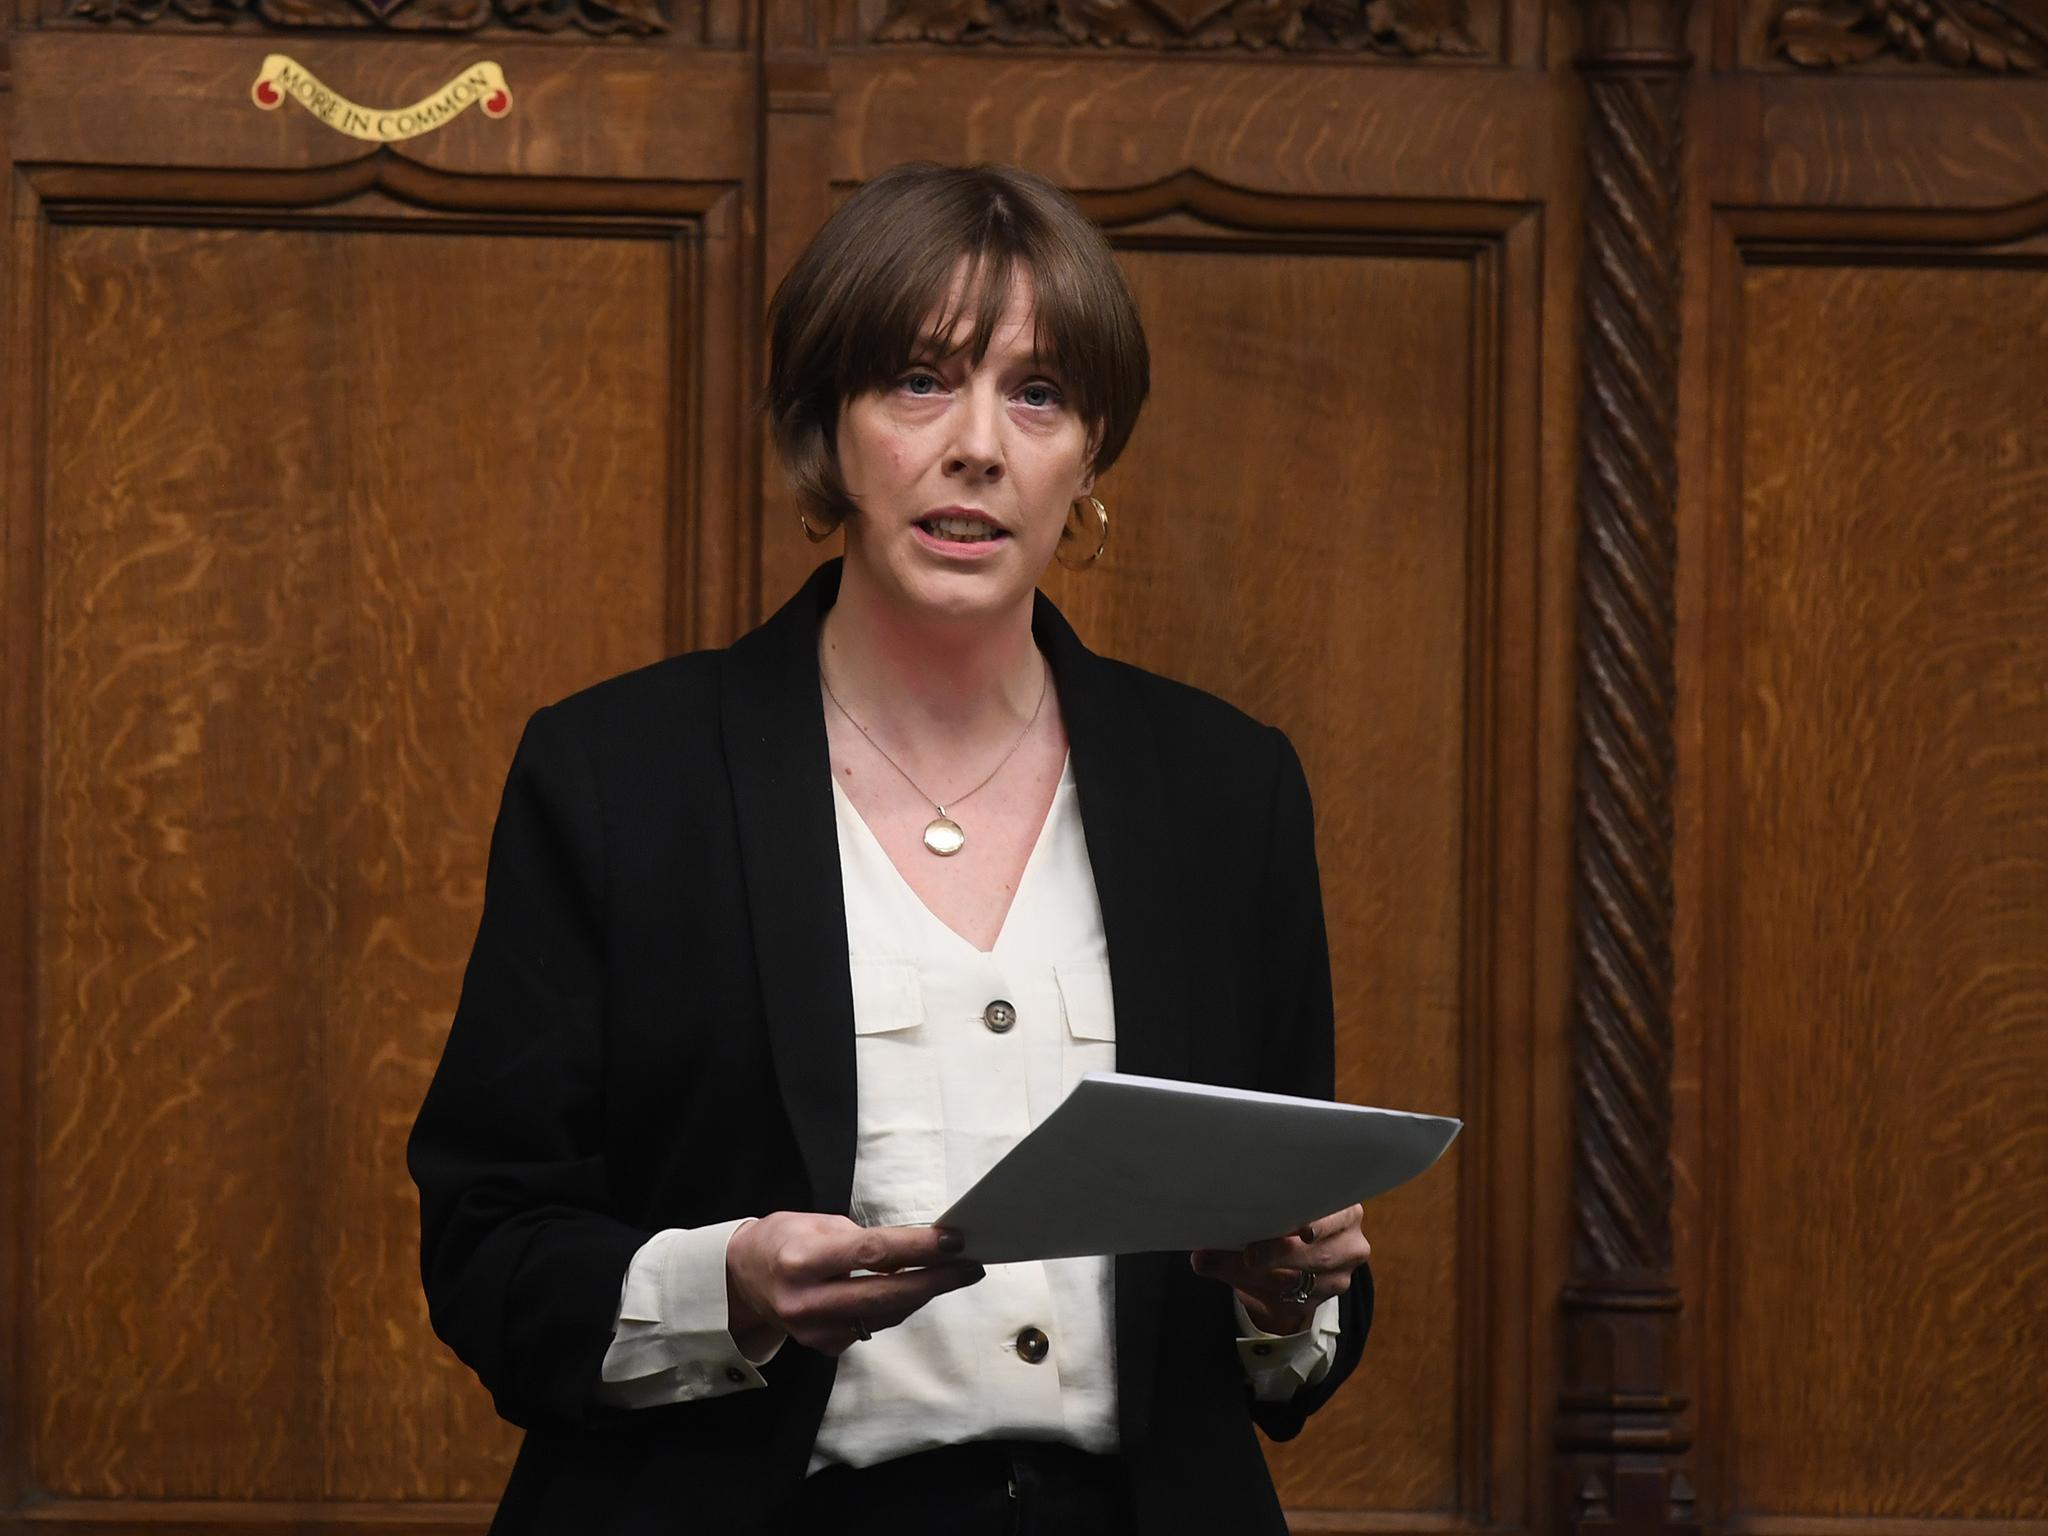 Women MPs ‘can’t be too rowdy, nor should we be too emotional,’ says Jess Phillips